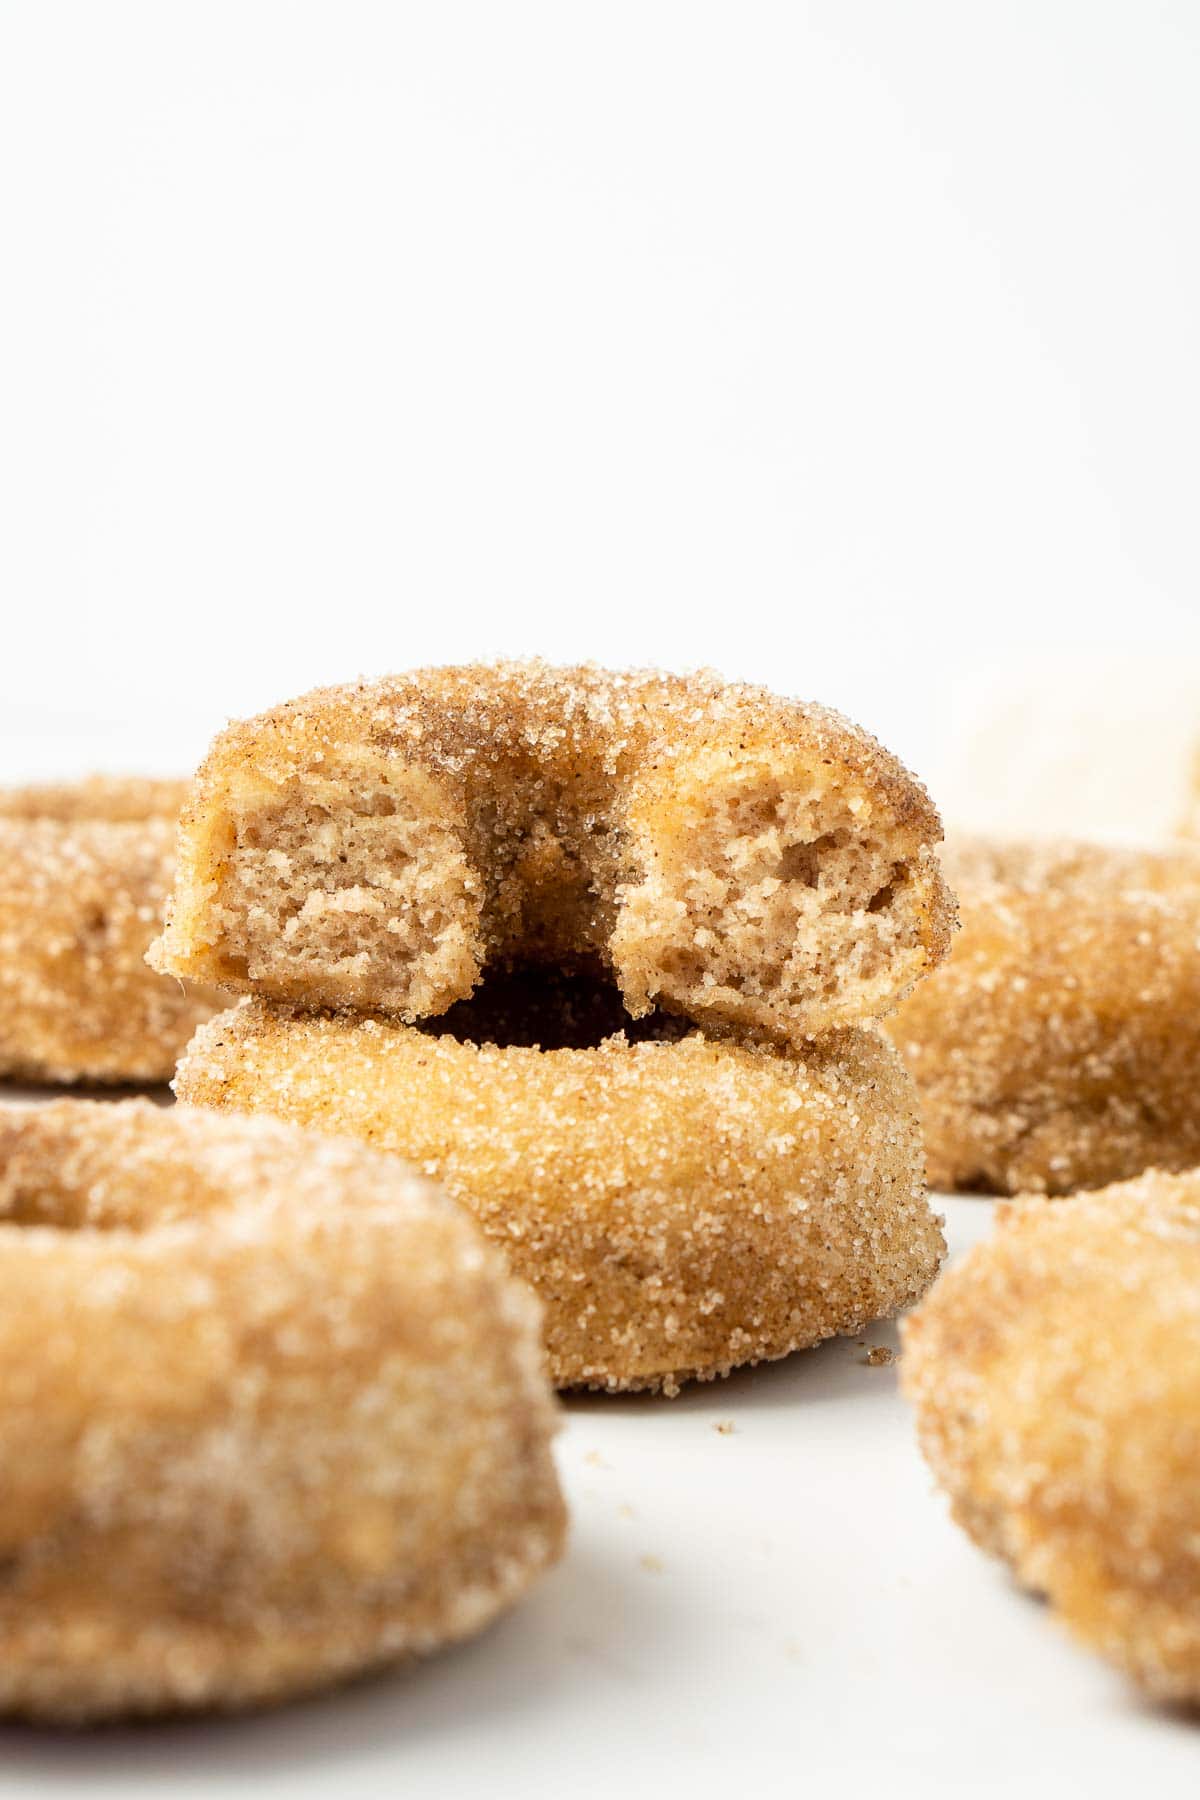 Baked cinnamon sugar doughnuts stacked on top of each other, one with a bite taken.